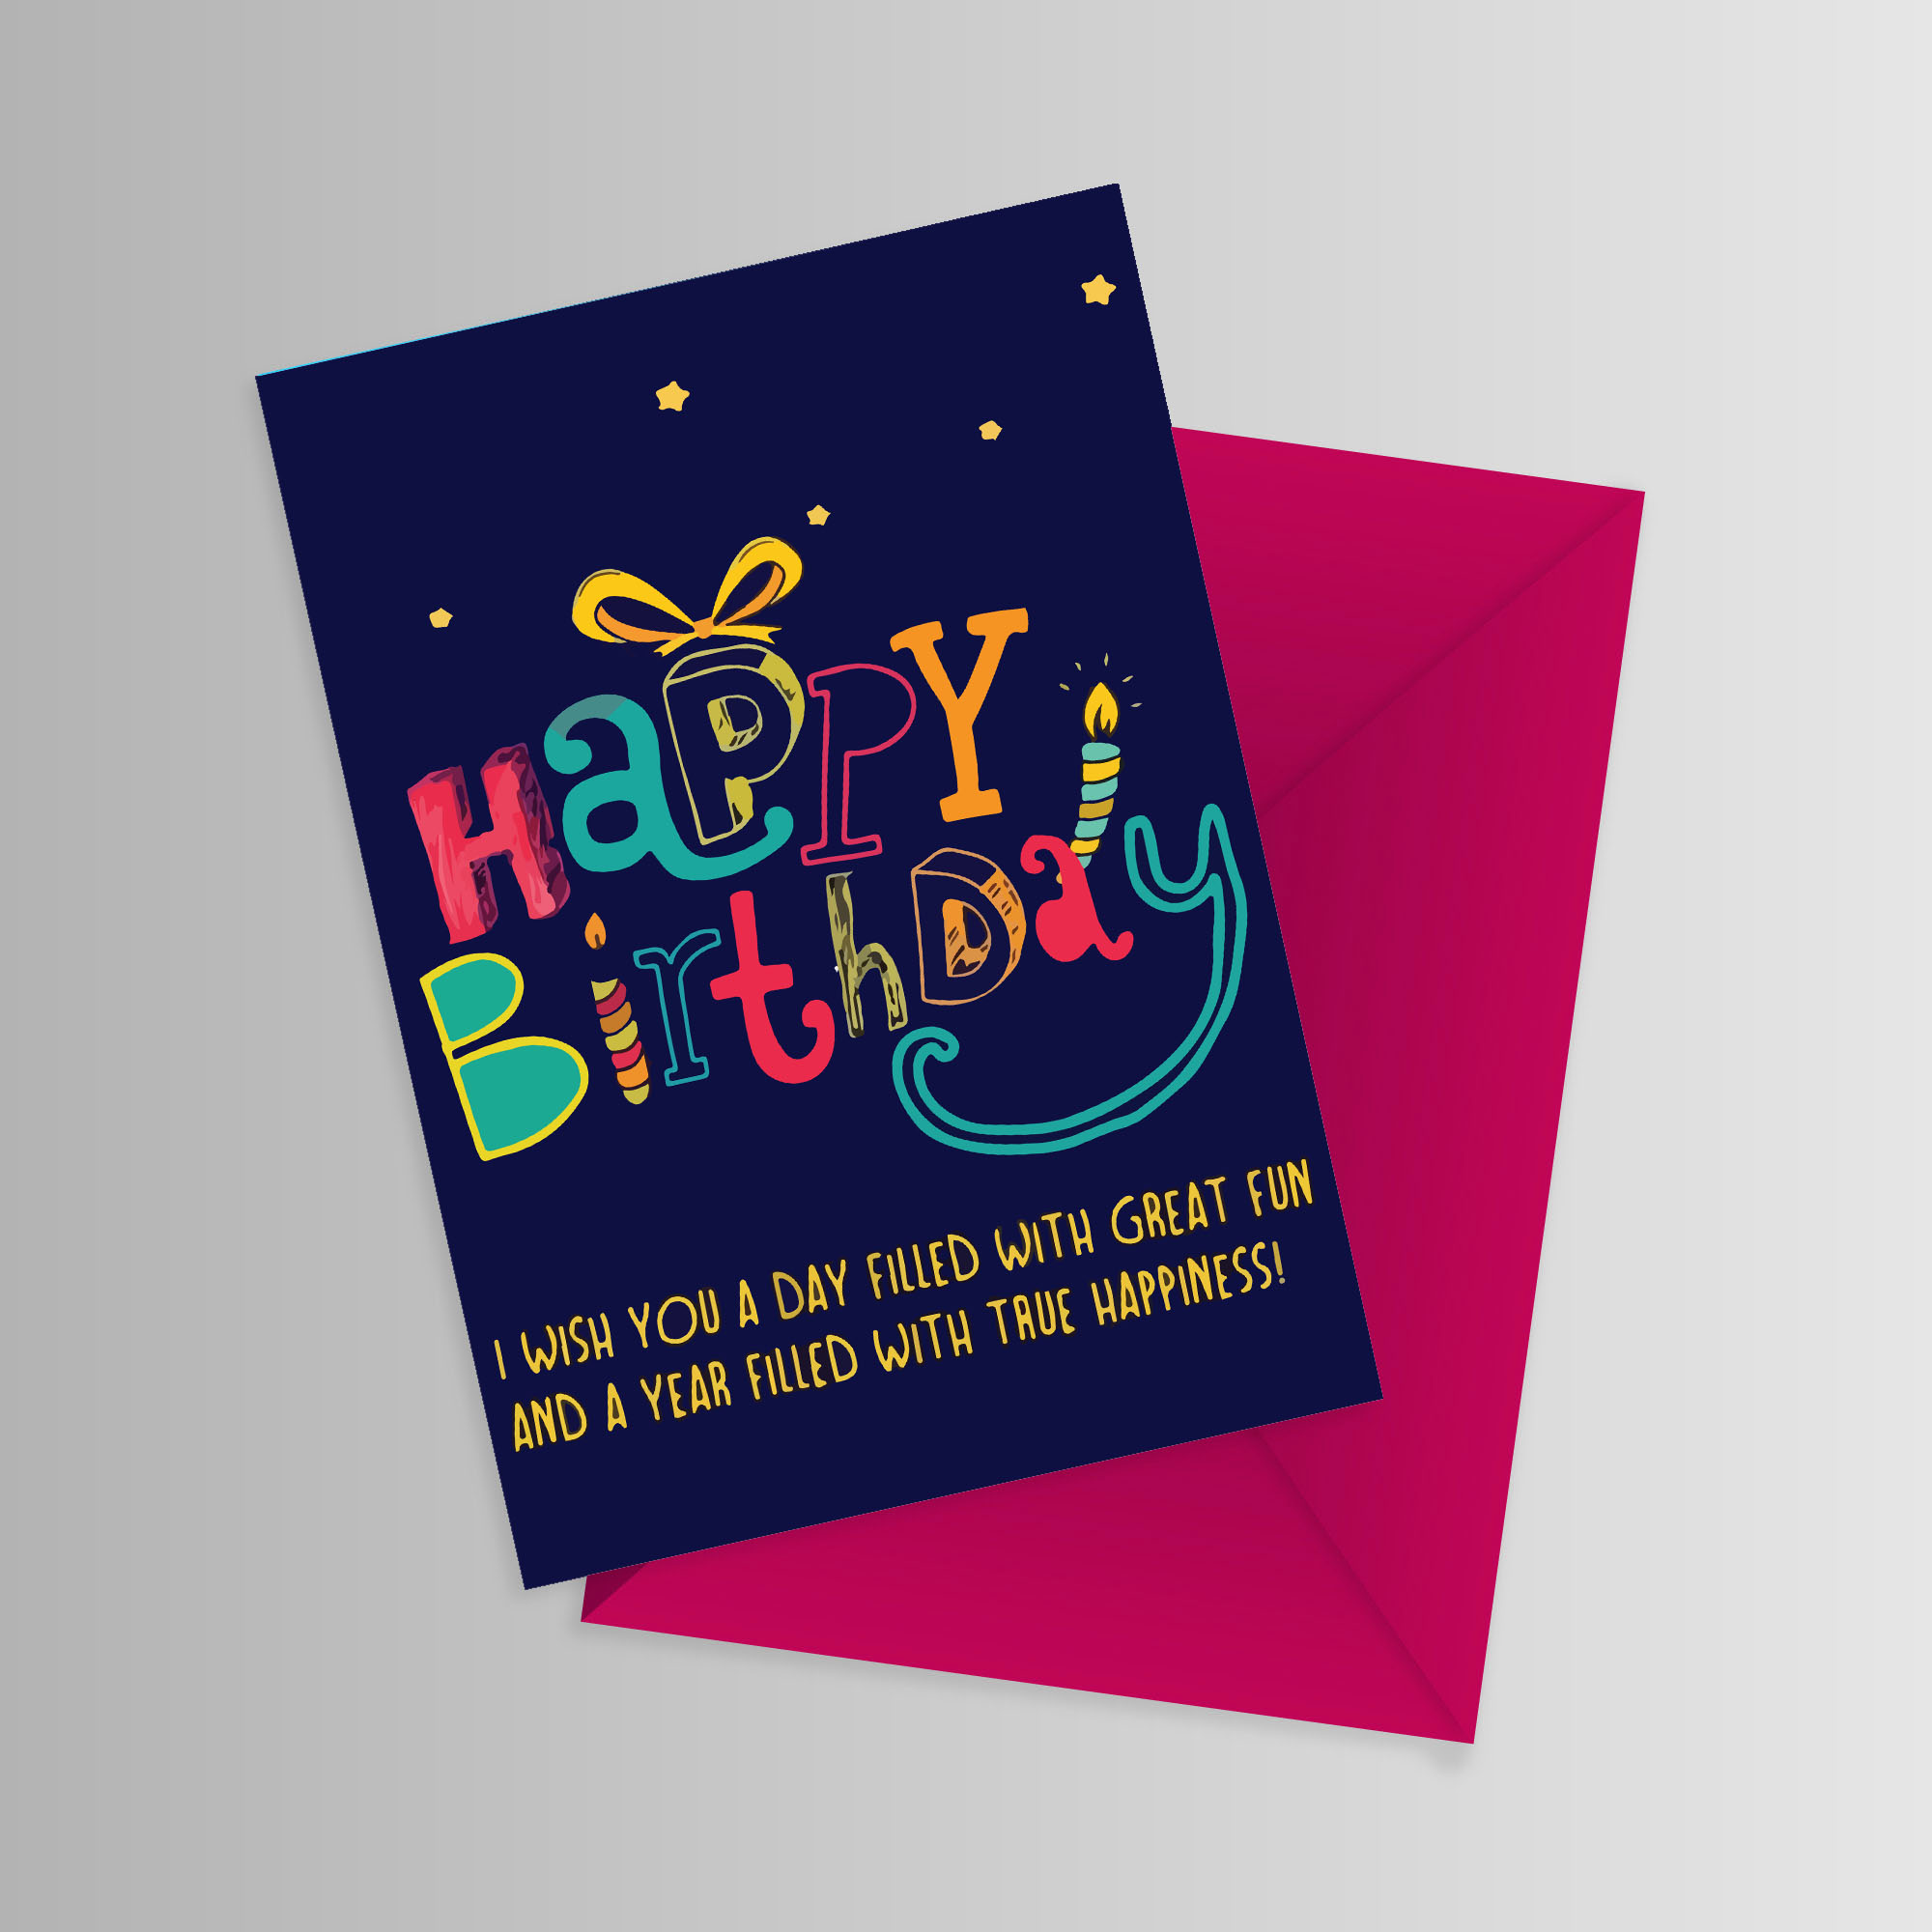 100+ Sweet Birthday Messages, Birthday Cards And Gift Ideas